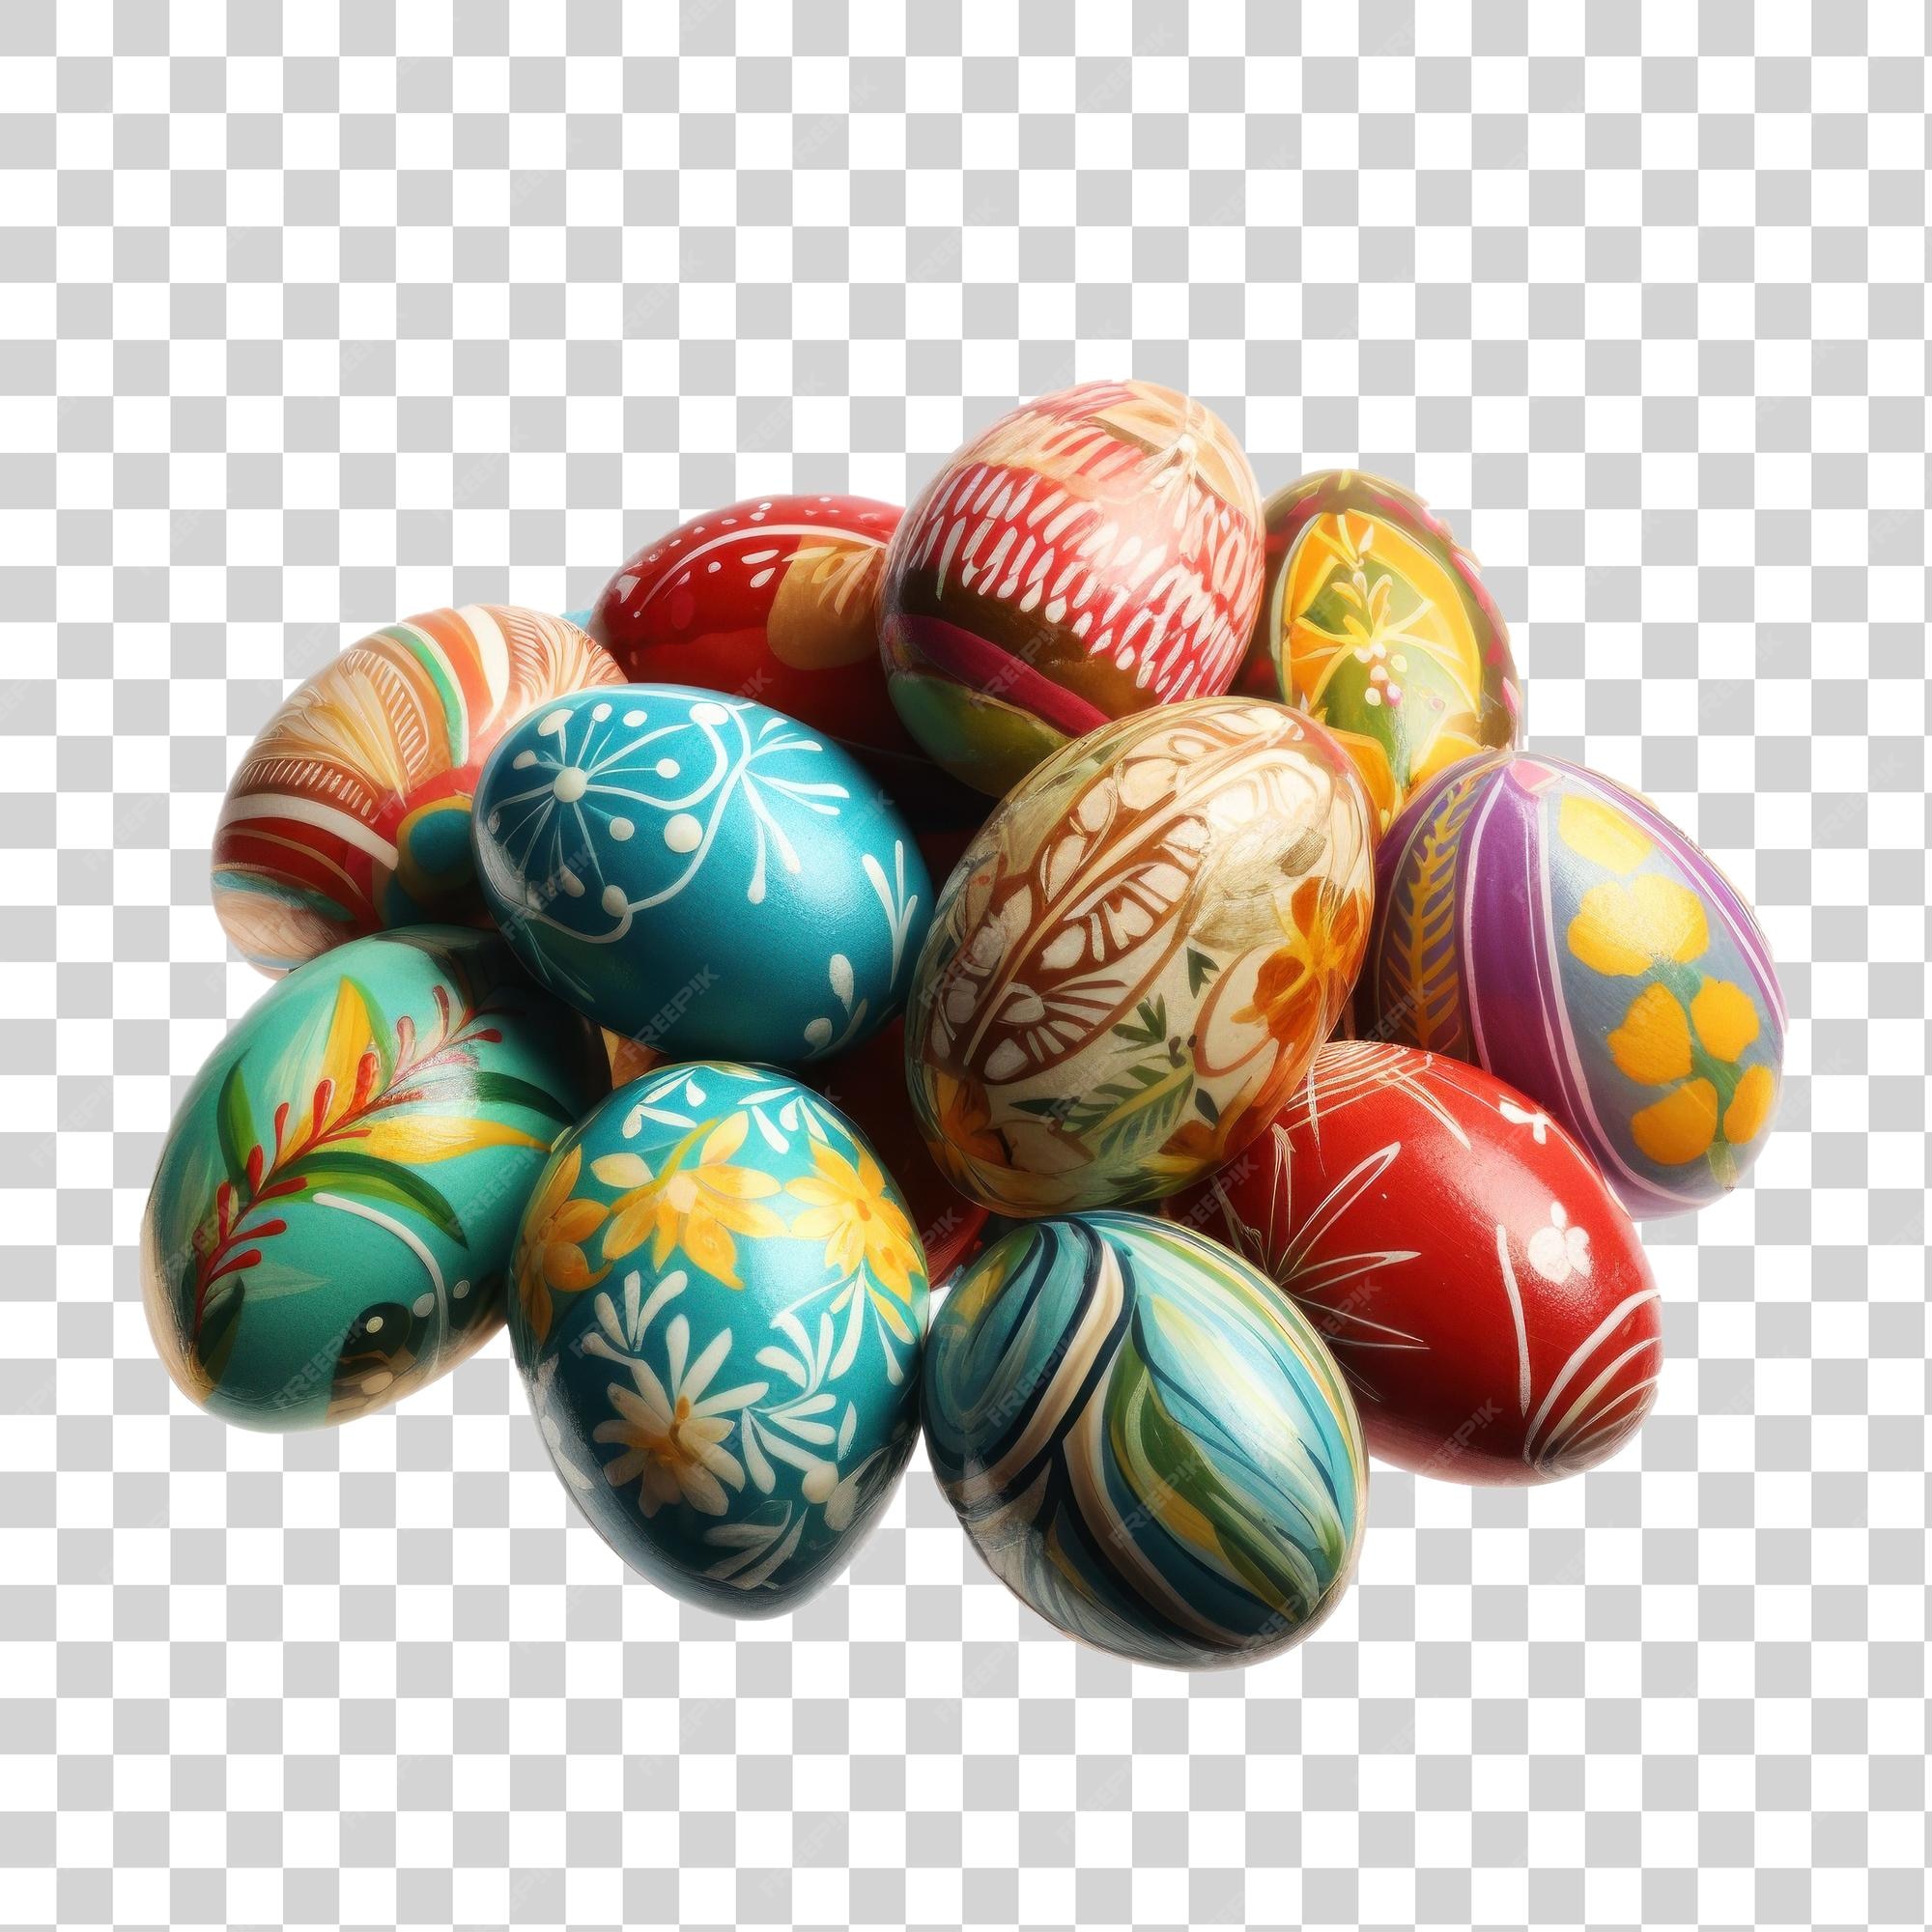 Chocolate Egg PNG and Chocolate Egg Transparent Clipart Free